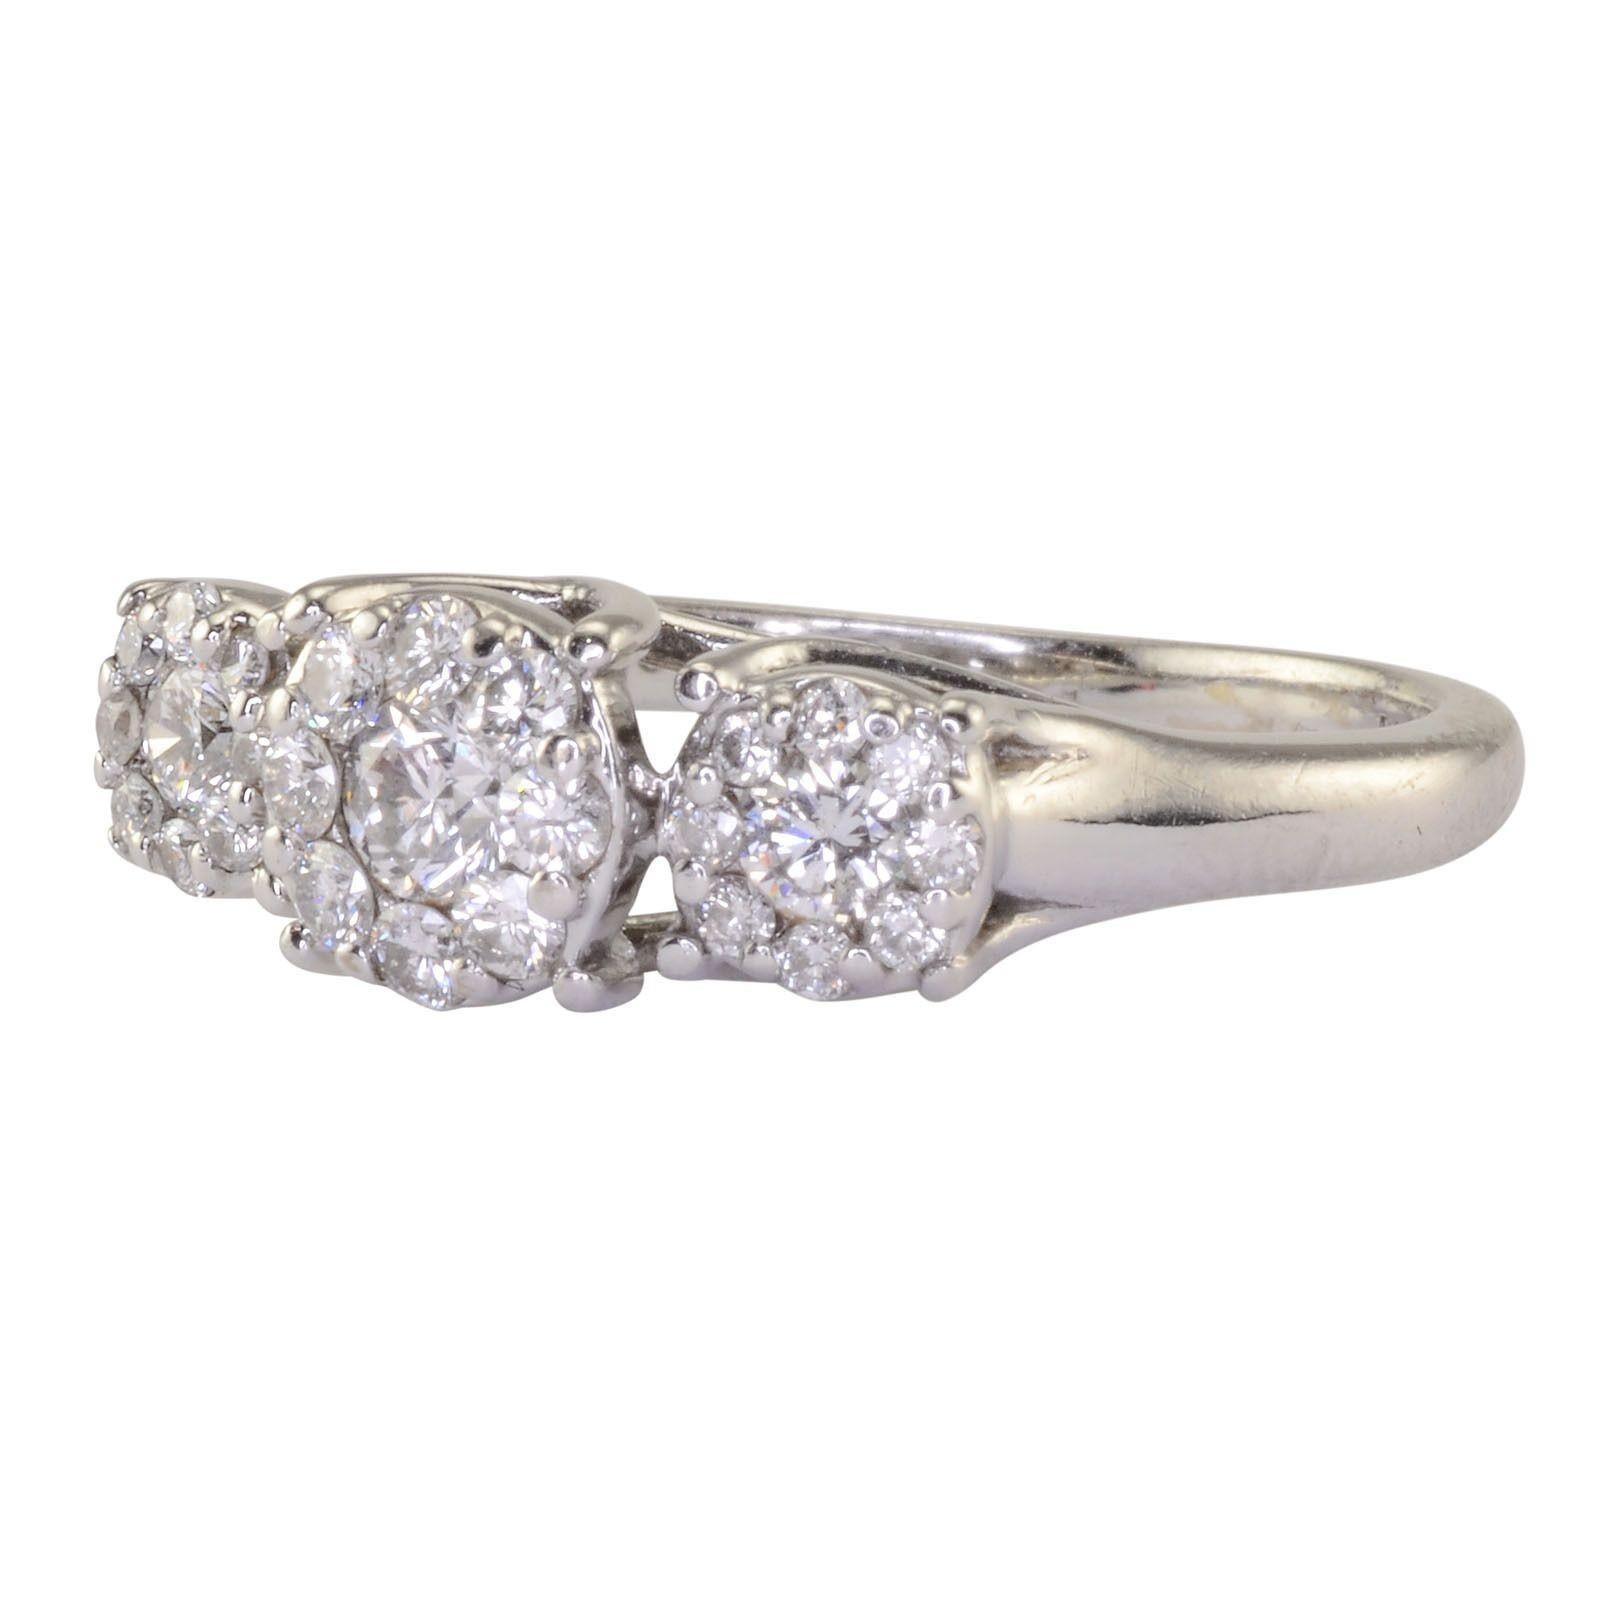 Estate 0.85 CTW diamond 18K white gold ring. This diamond engagement ring has three round brilliant diamonds and small surrounding diamonds at 0.85 carat total weight SI clarity G color. The 18 karat white gold diamond ring is a size 5. [KIMH